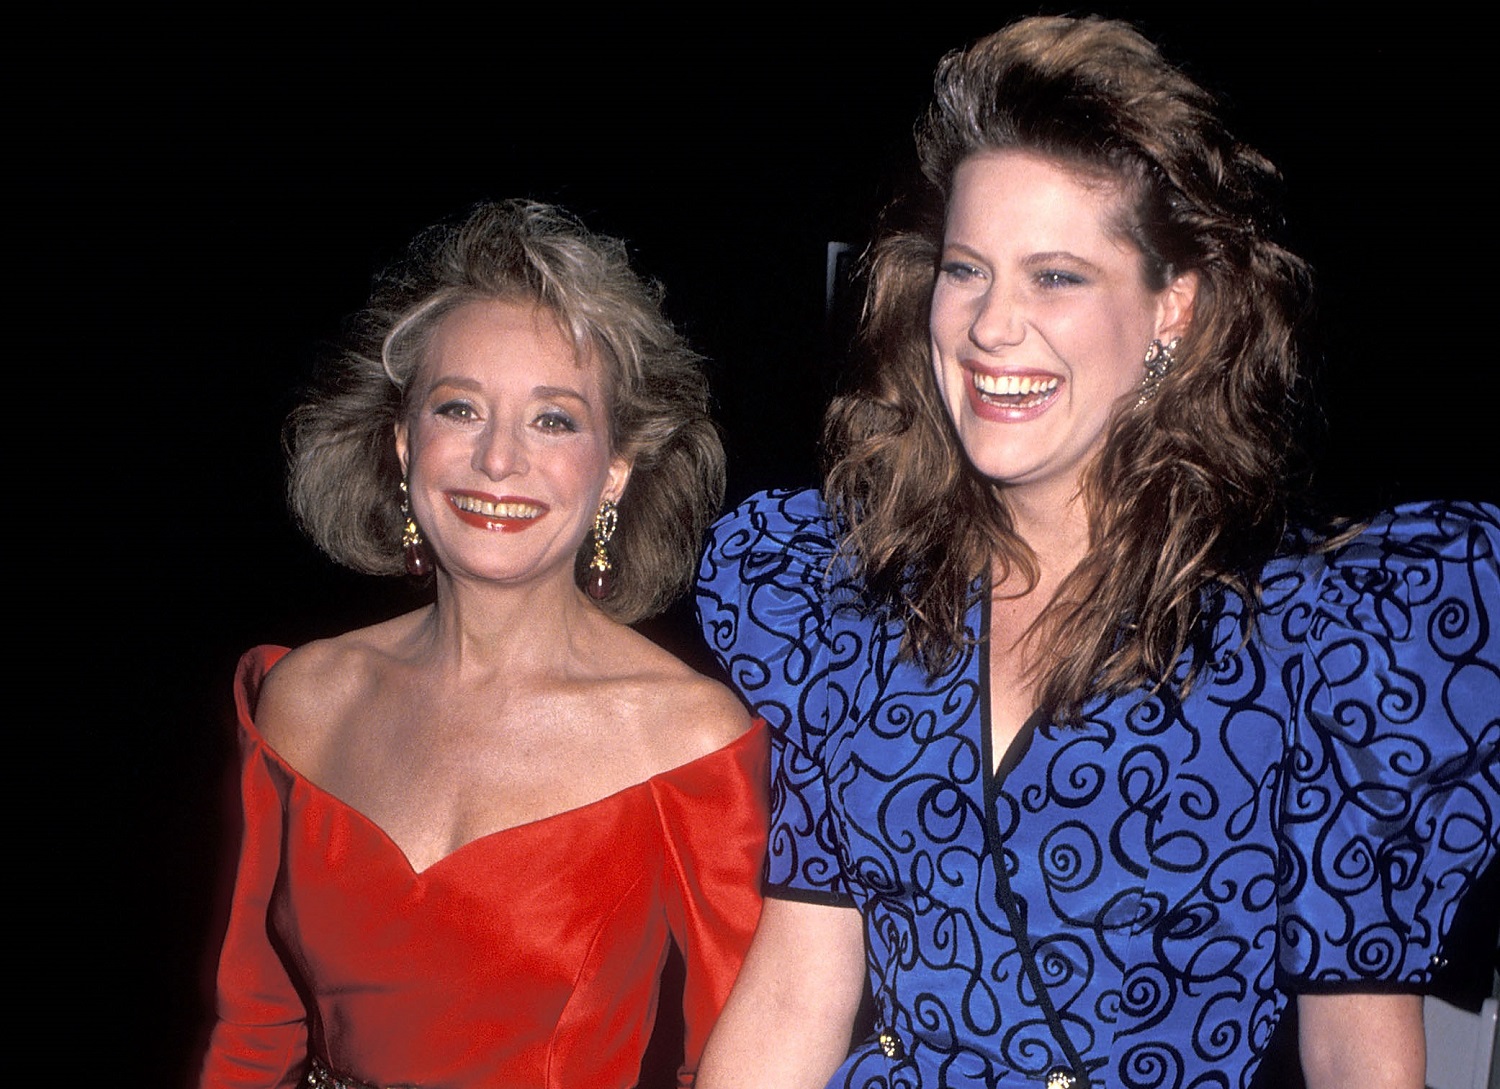 TV journalist Barbara Walters and daughter Jacqueline Guber attend the Sixth Annual Television Academy Hall of Fame Induction Ceremony on January 7, 1990